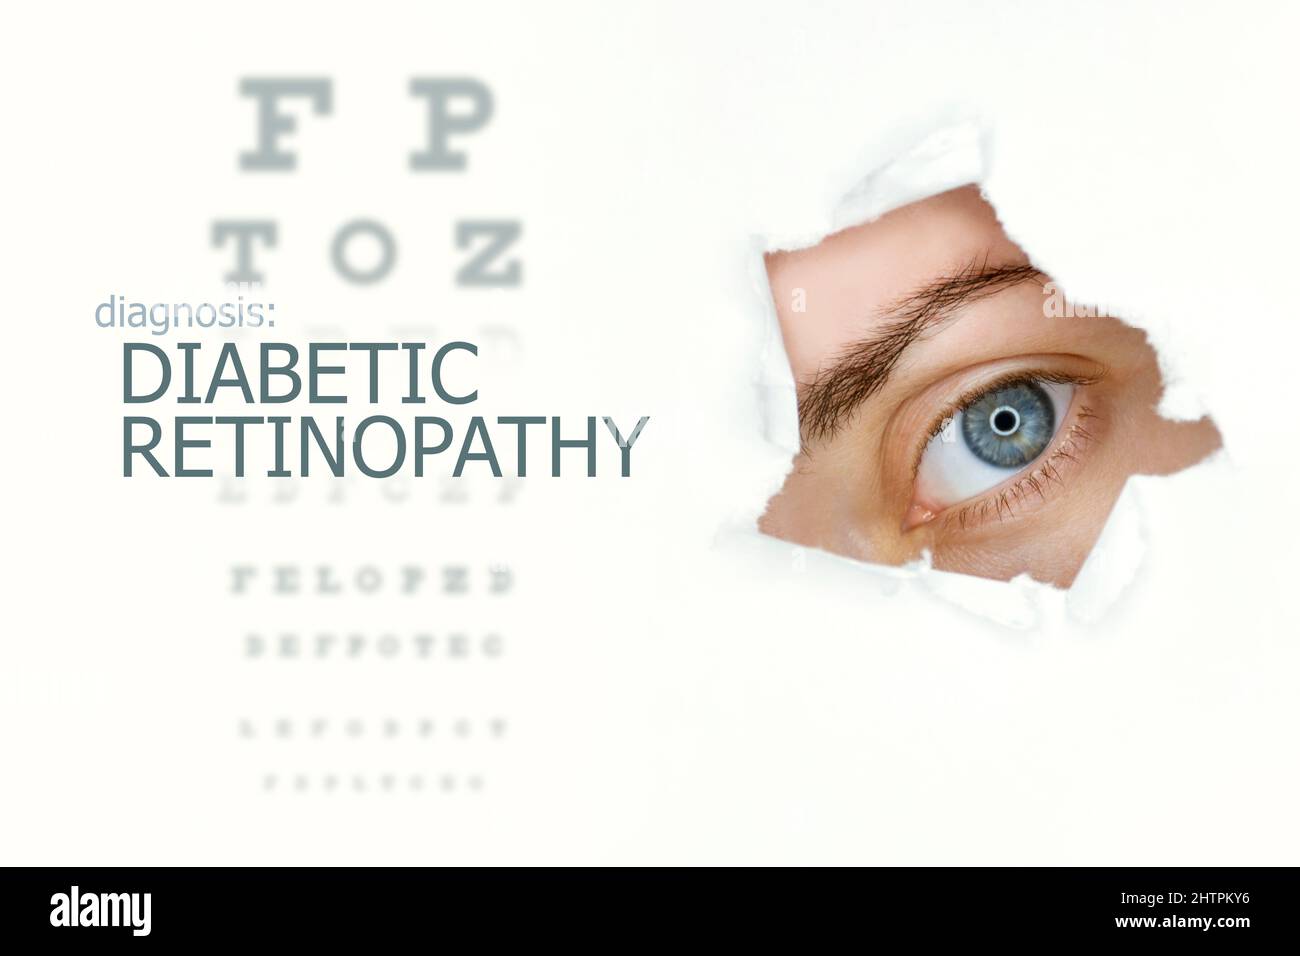 Diabetic retinopathy disease poster with eye test chart and blue eye.Isolated on white Stock Photo